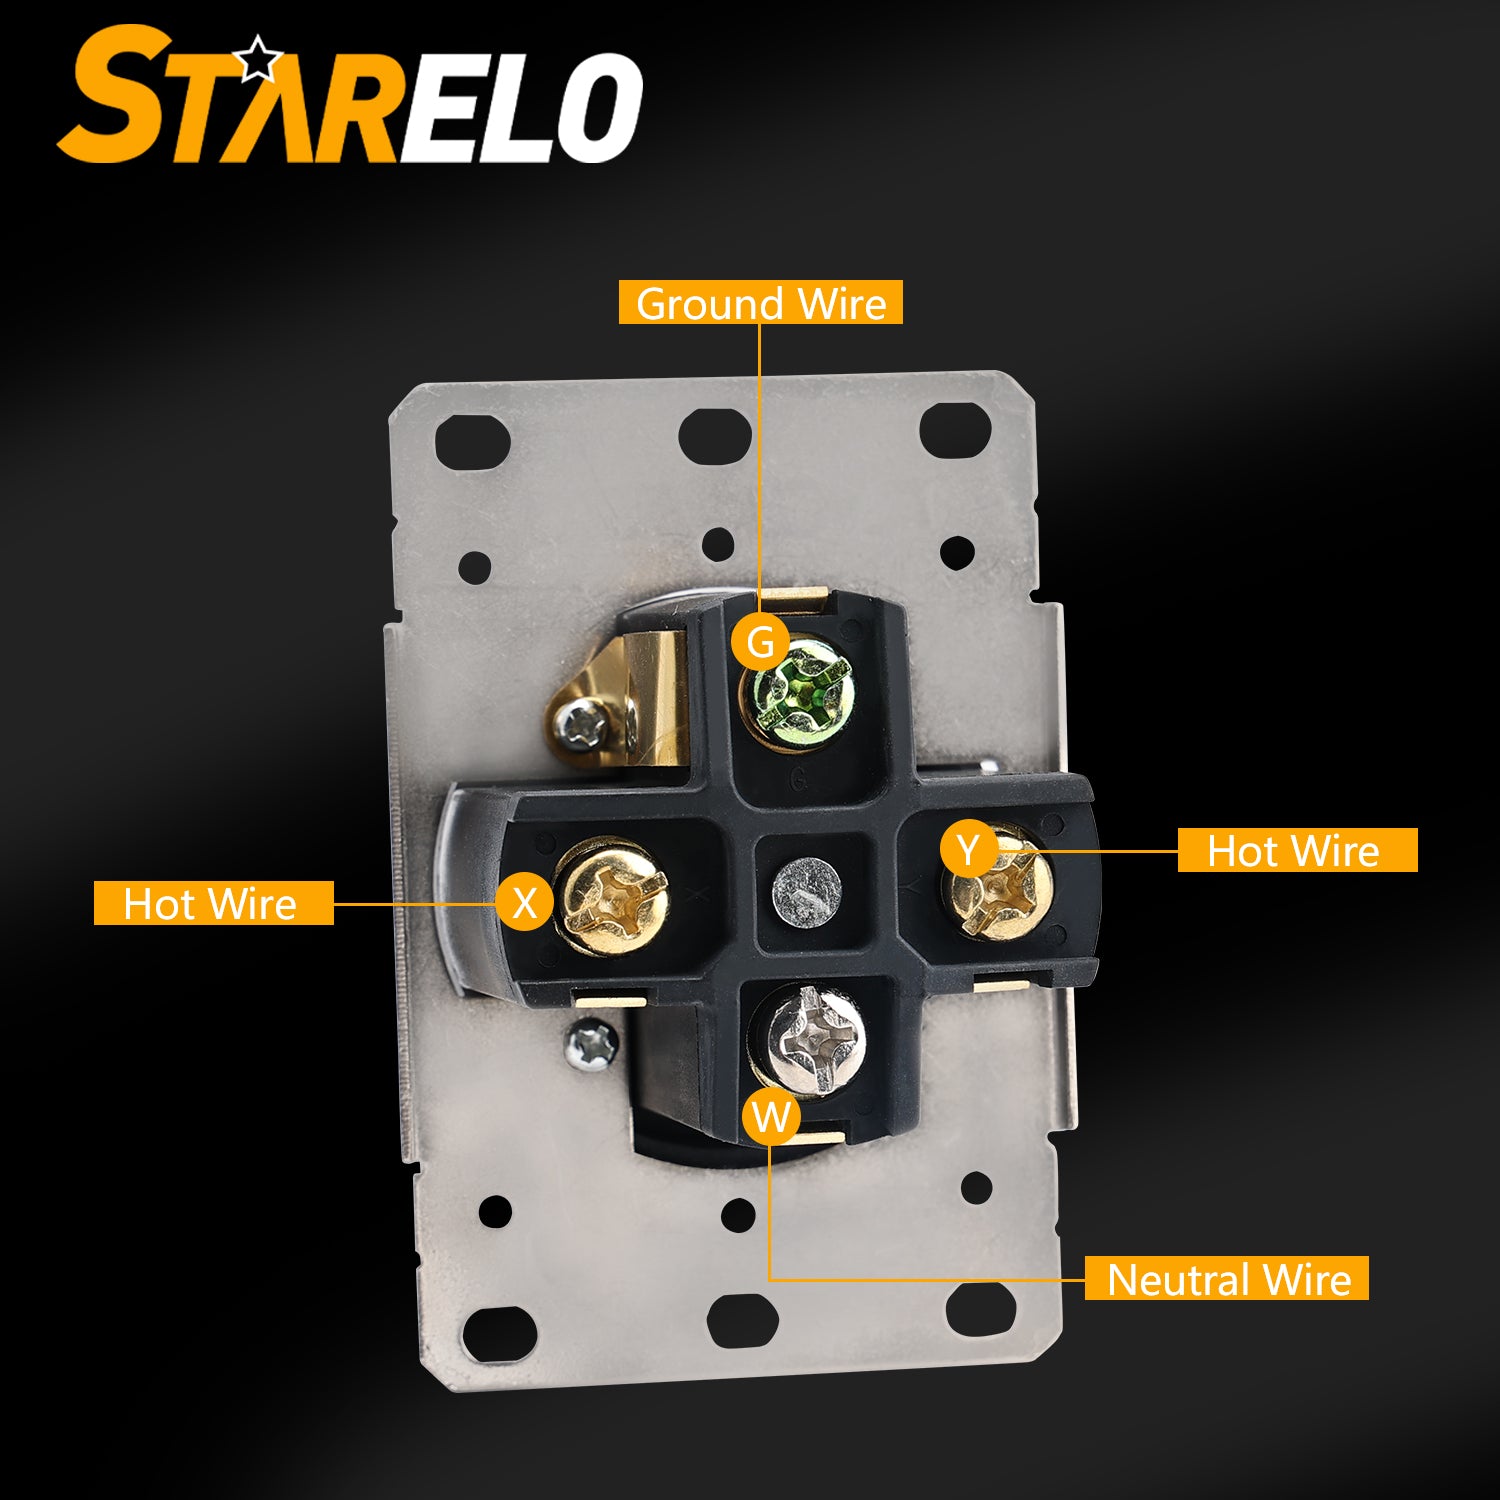 STARELO Flush Mounting Receptacle NEMA 14-50R, 50A 125/250V 3 Pole 4 Wire Grounding Straight Blade, Heavy Duty Industrial Grade Power Receptacle, UL Listed (14-50R)